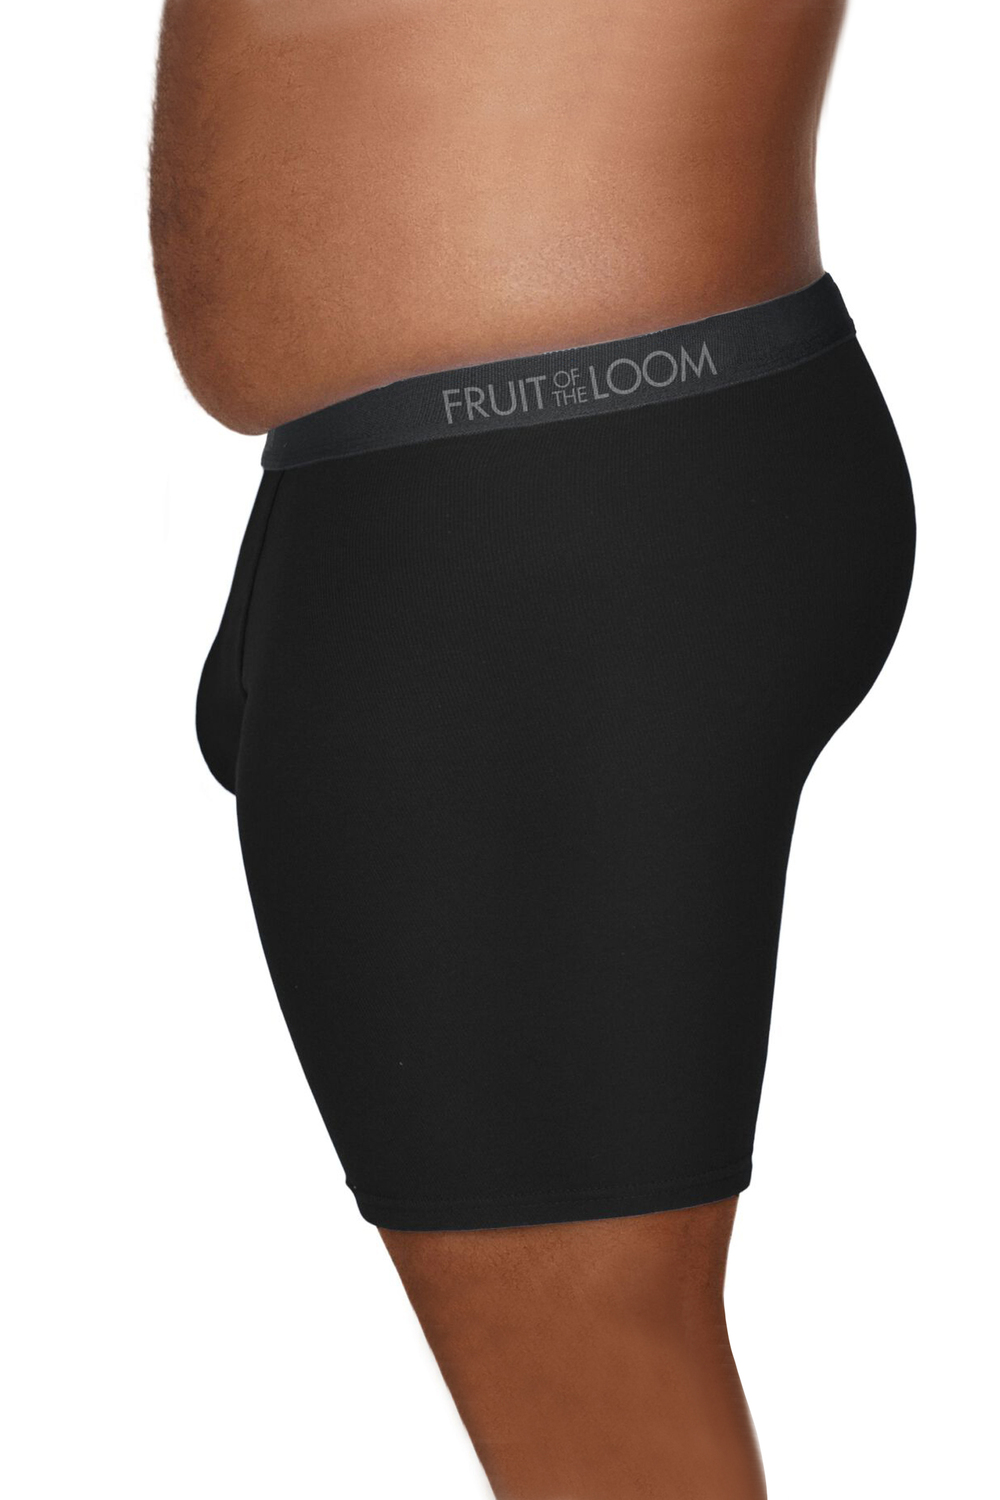 Fruit Of The Loom Underwear on sale - Outlet